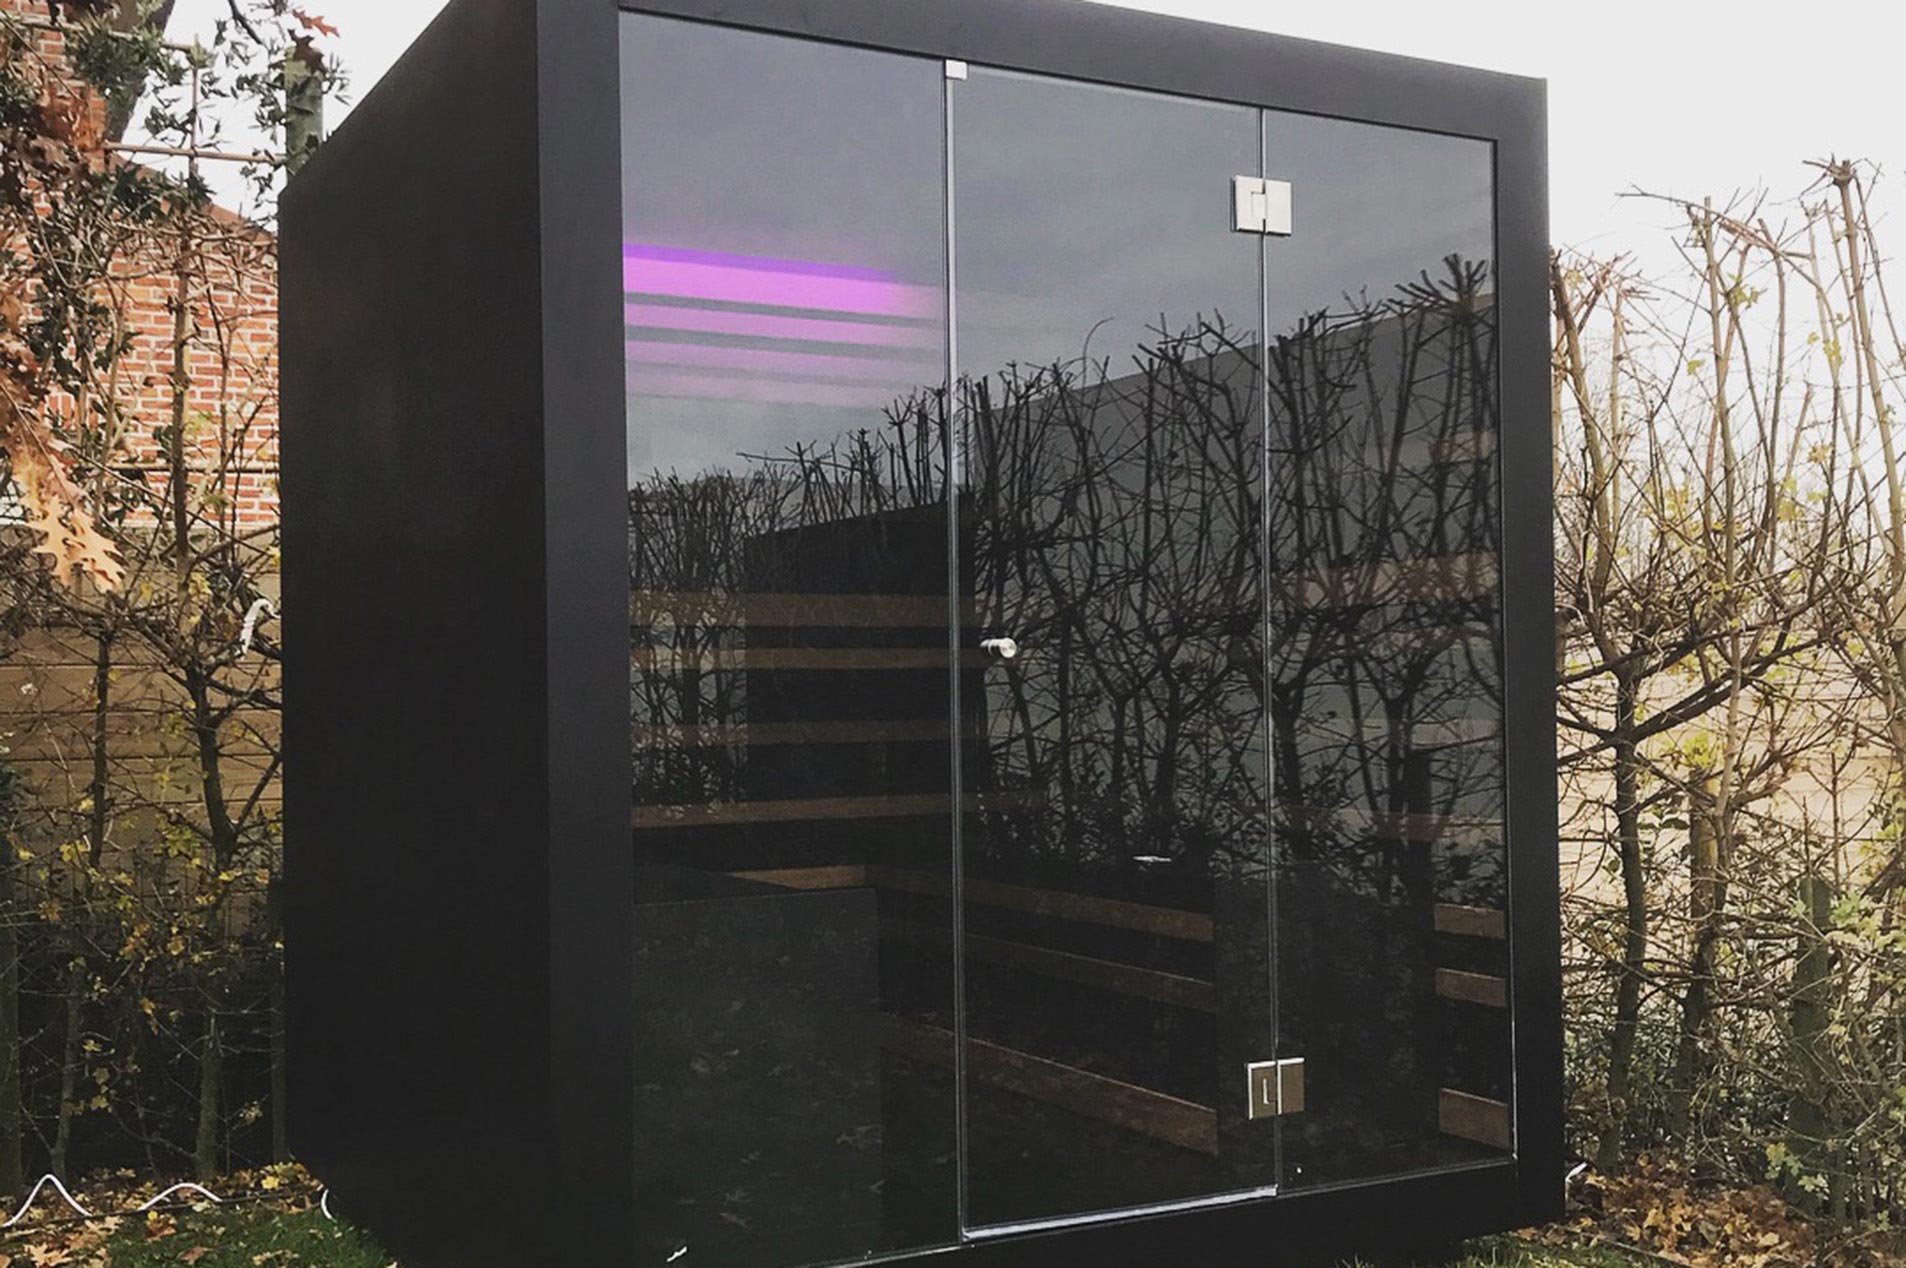 Black Aluminium Sauna With LED Lights. Image shows one of Thermalux's premium outdoor saunas in a garden setting. Thermalux UK are suppliers of Premium Outdoor Saunas, Luxury Outdoor Saunas, and Aluminium Finish Saunas.